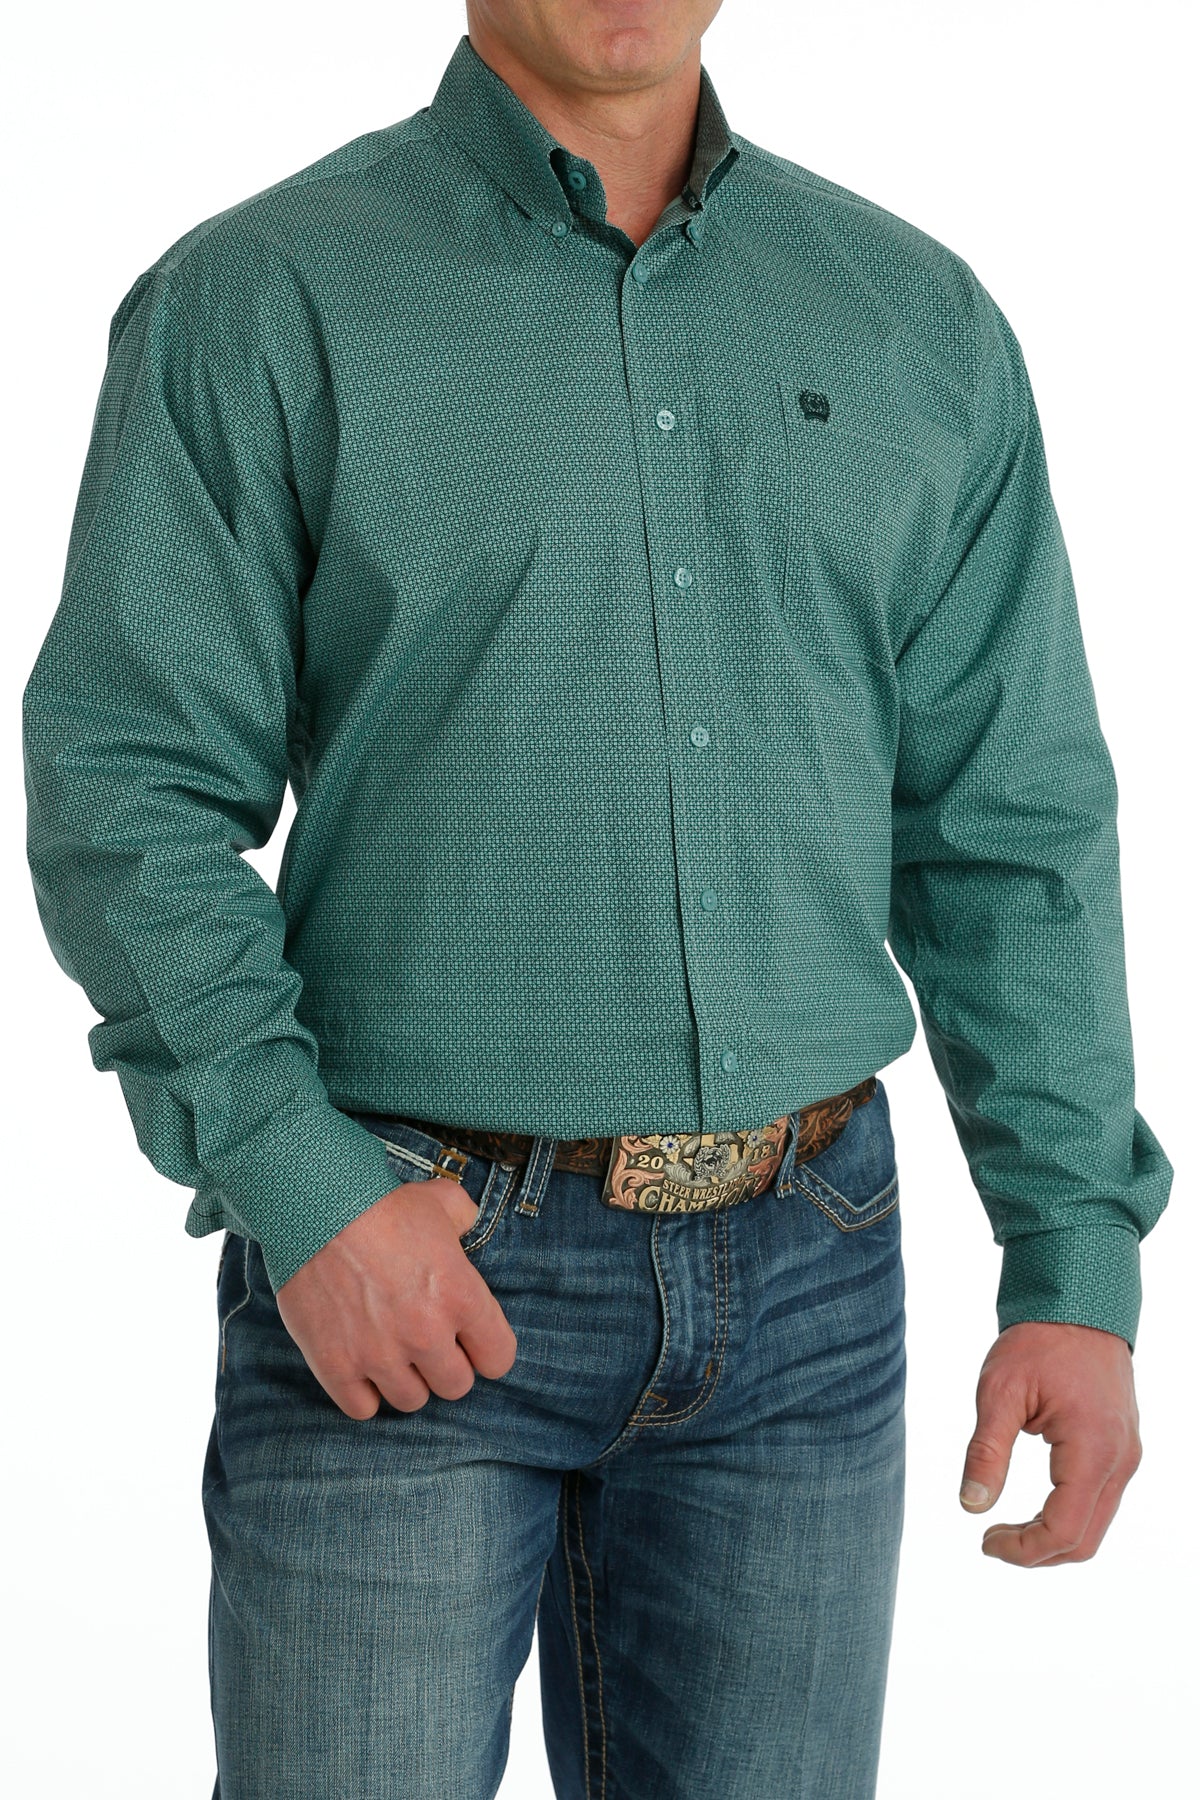 Mens Cinch Button Up- Turquoise Print